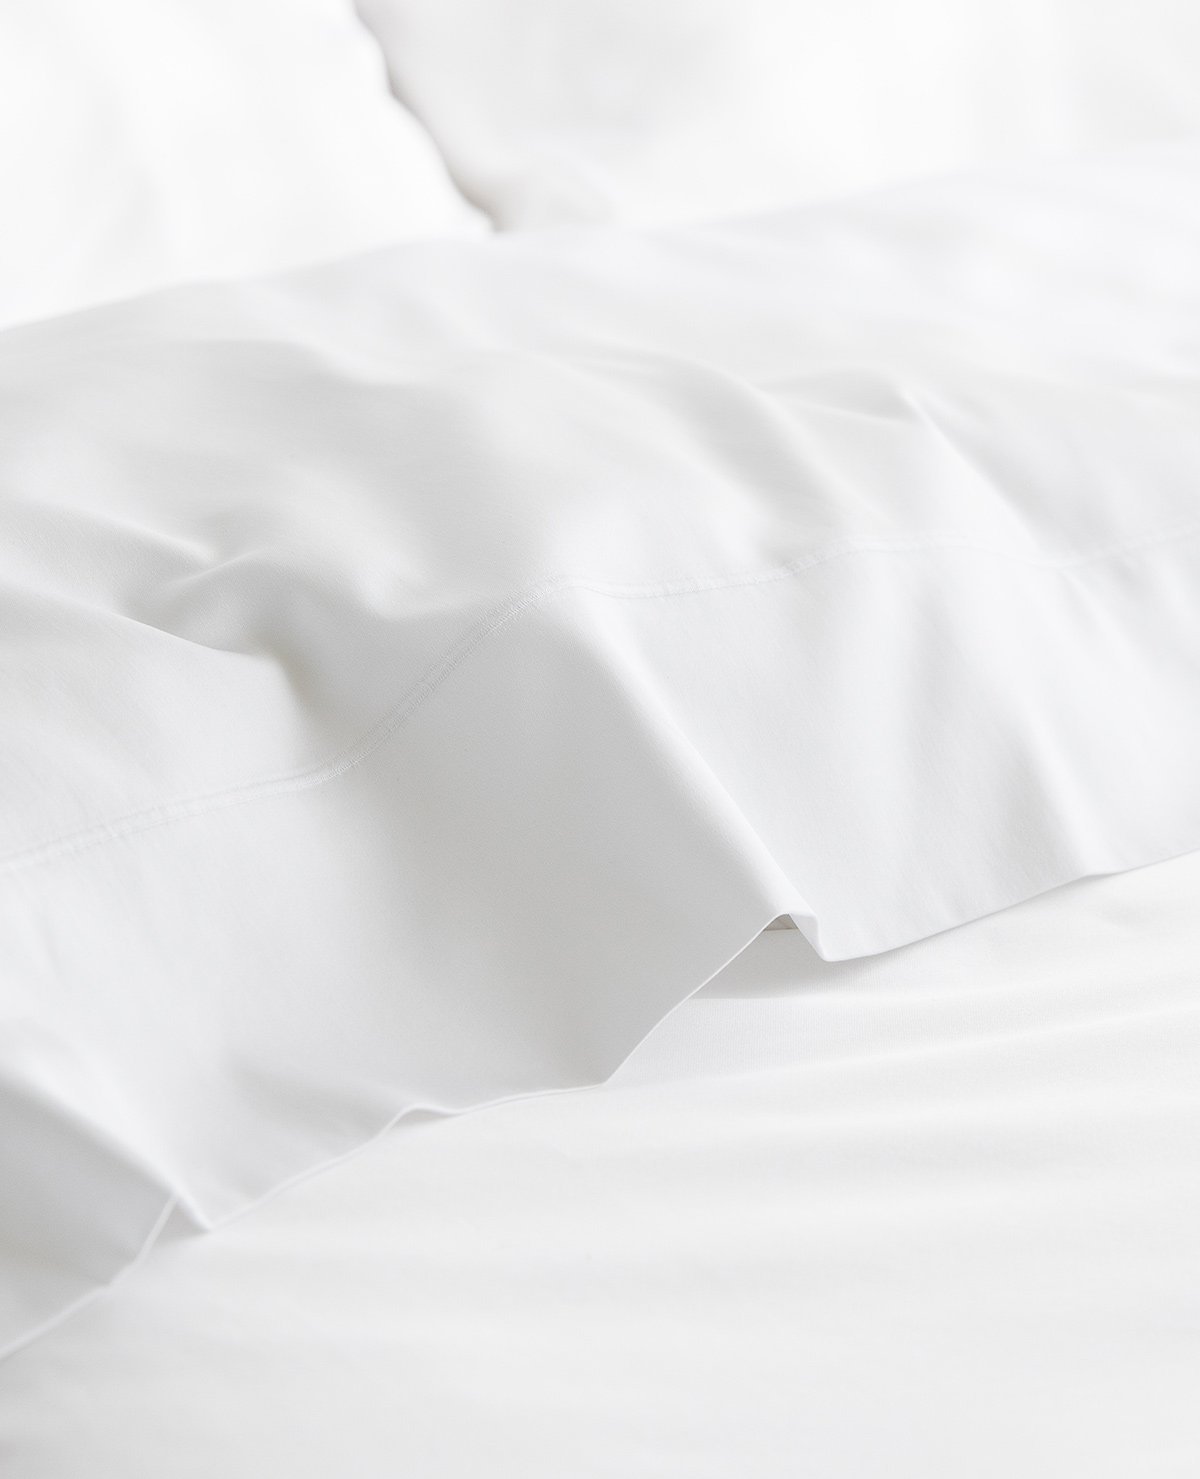 White Sheets: A Bedroom's Best Friend